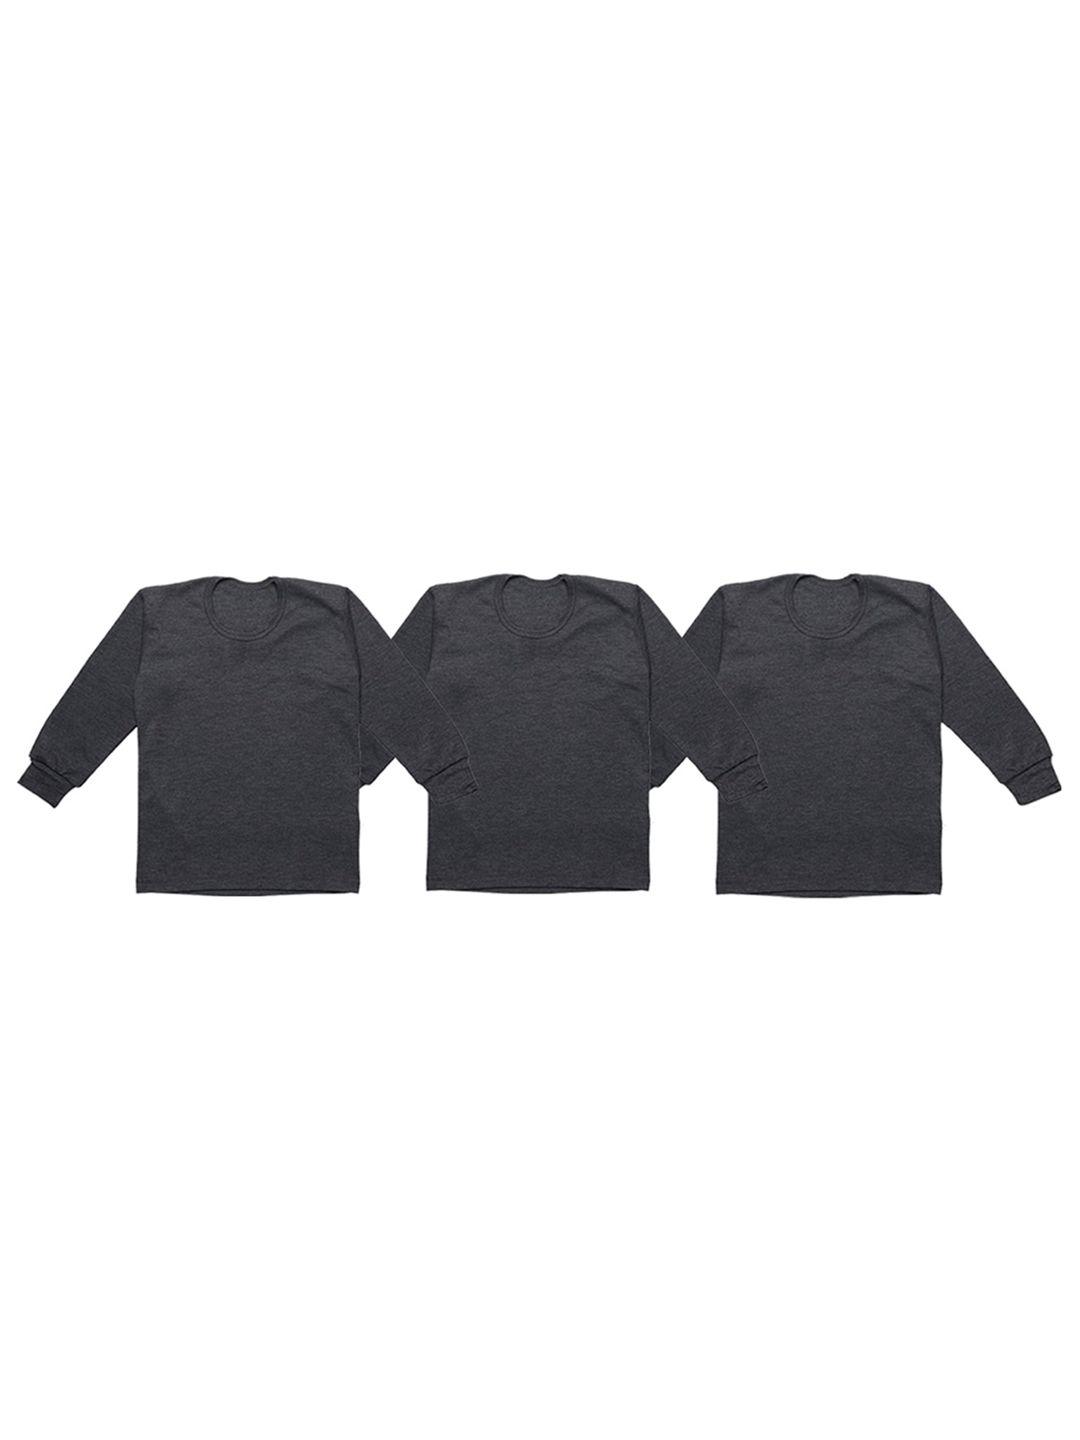 vimal jonney infant kids pack of 3 charcoal grey solid thermal tops